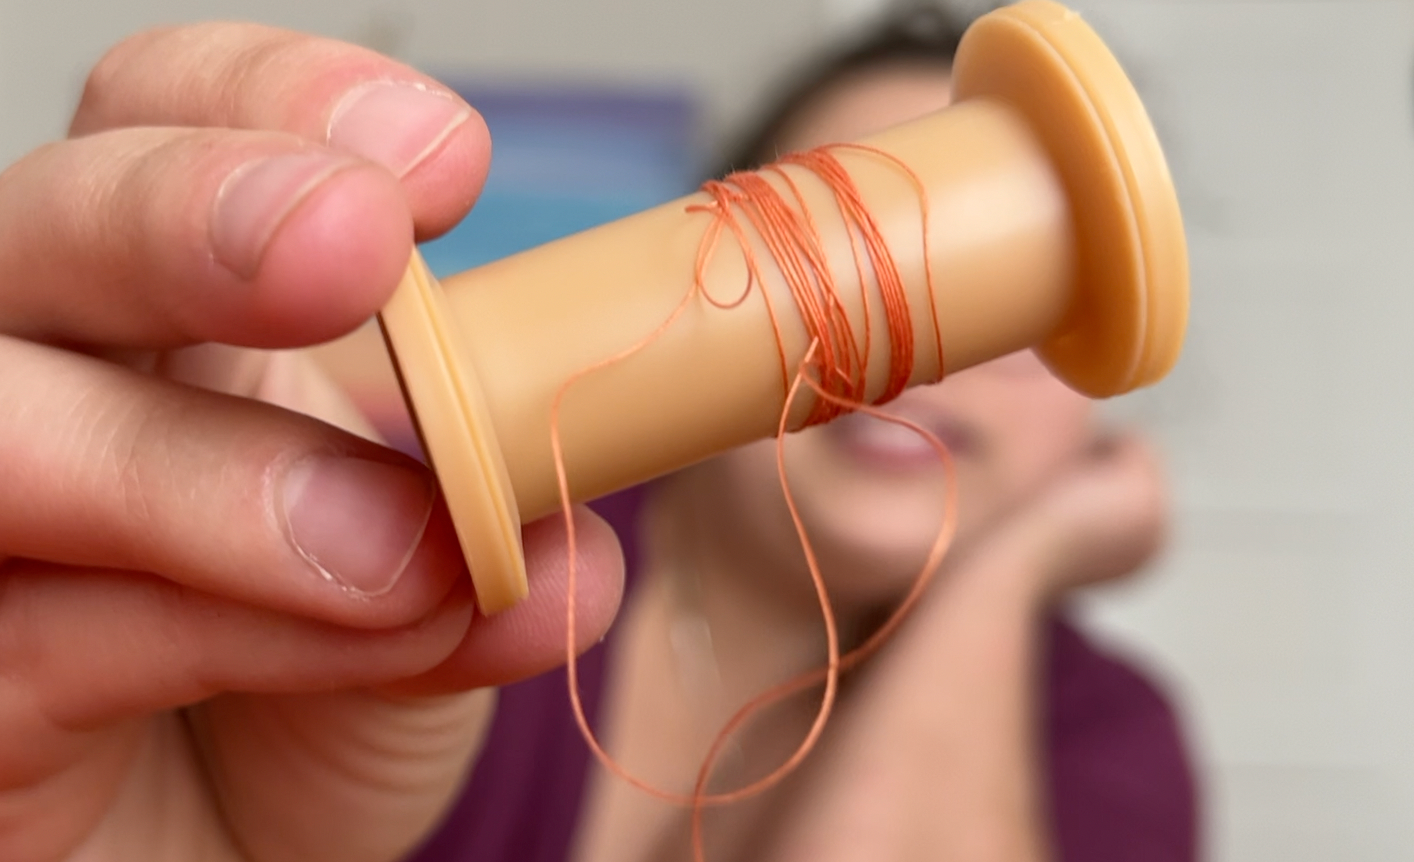 A spool of thread with very little orange thread left on it